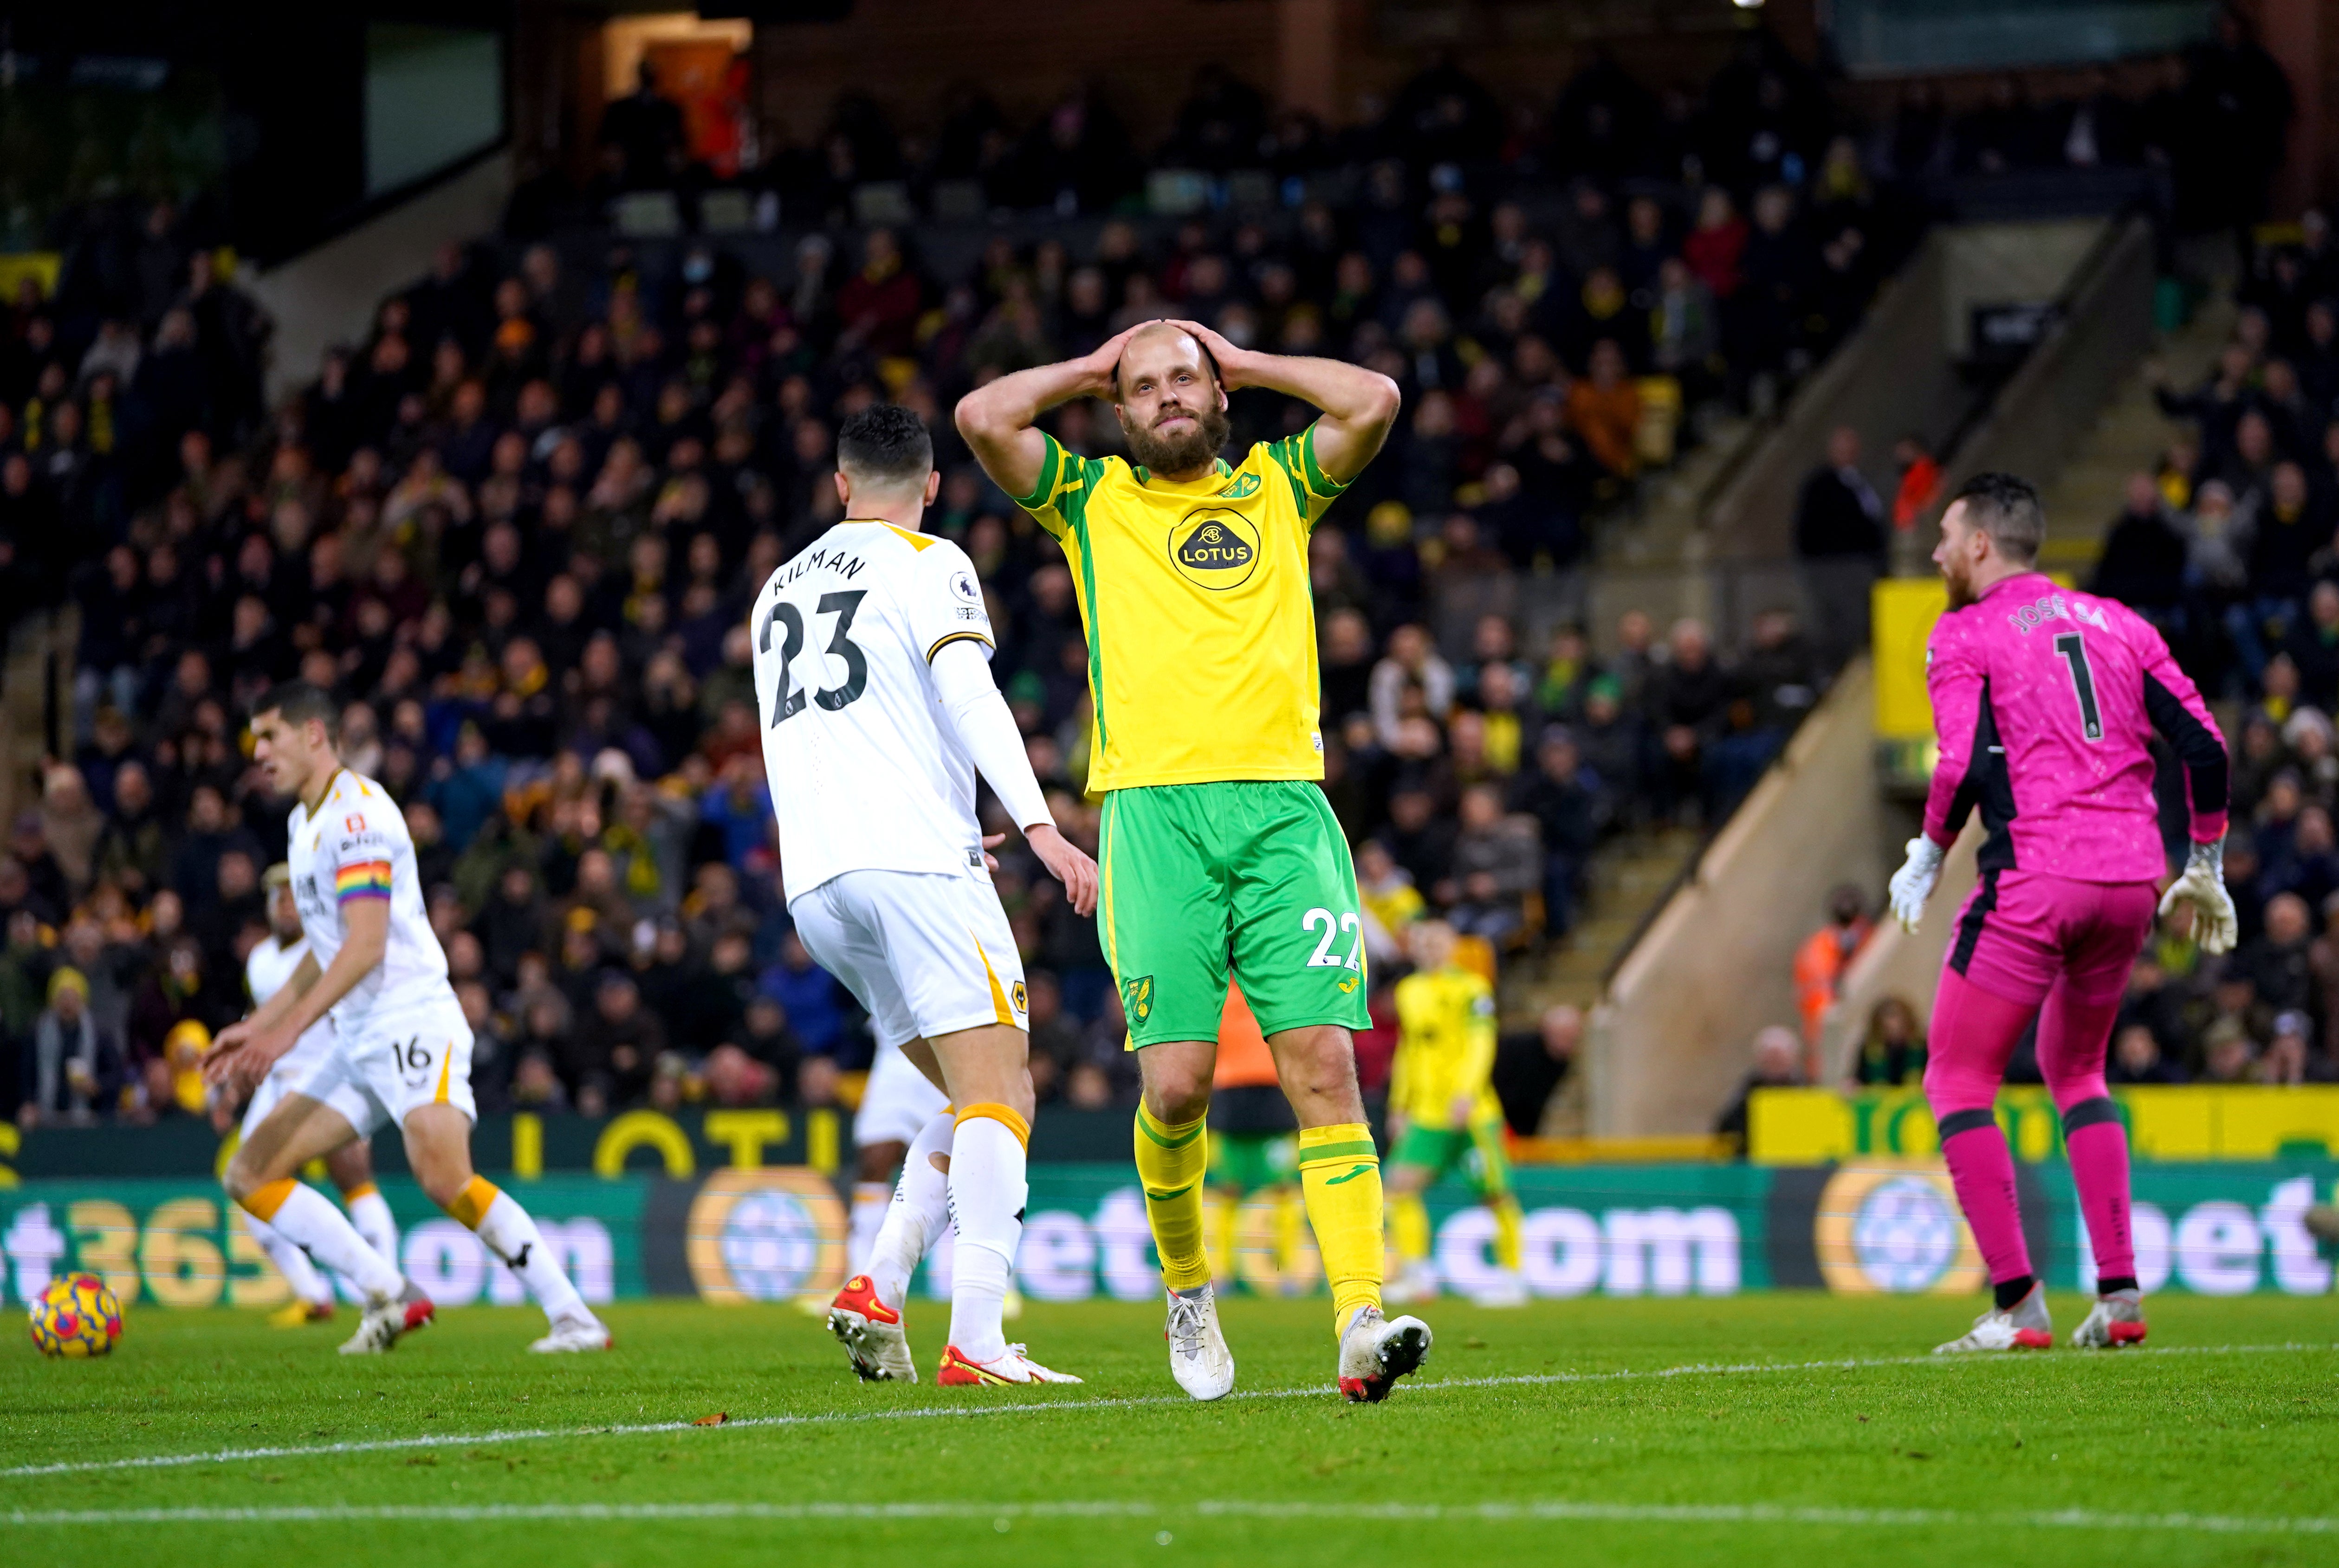 Teemu Pukki was left to rue missed chances as Norwich and Wolves played out a goalless draw (Joe Giddens/PA)